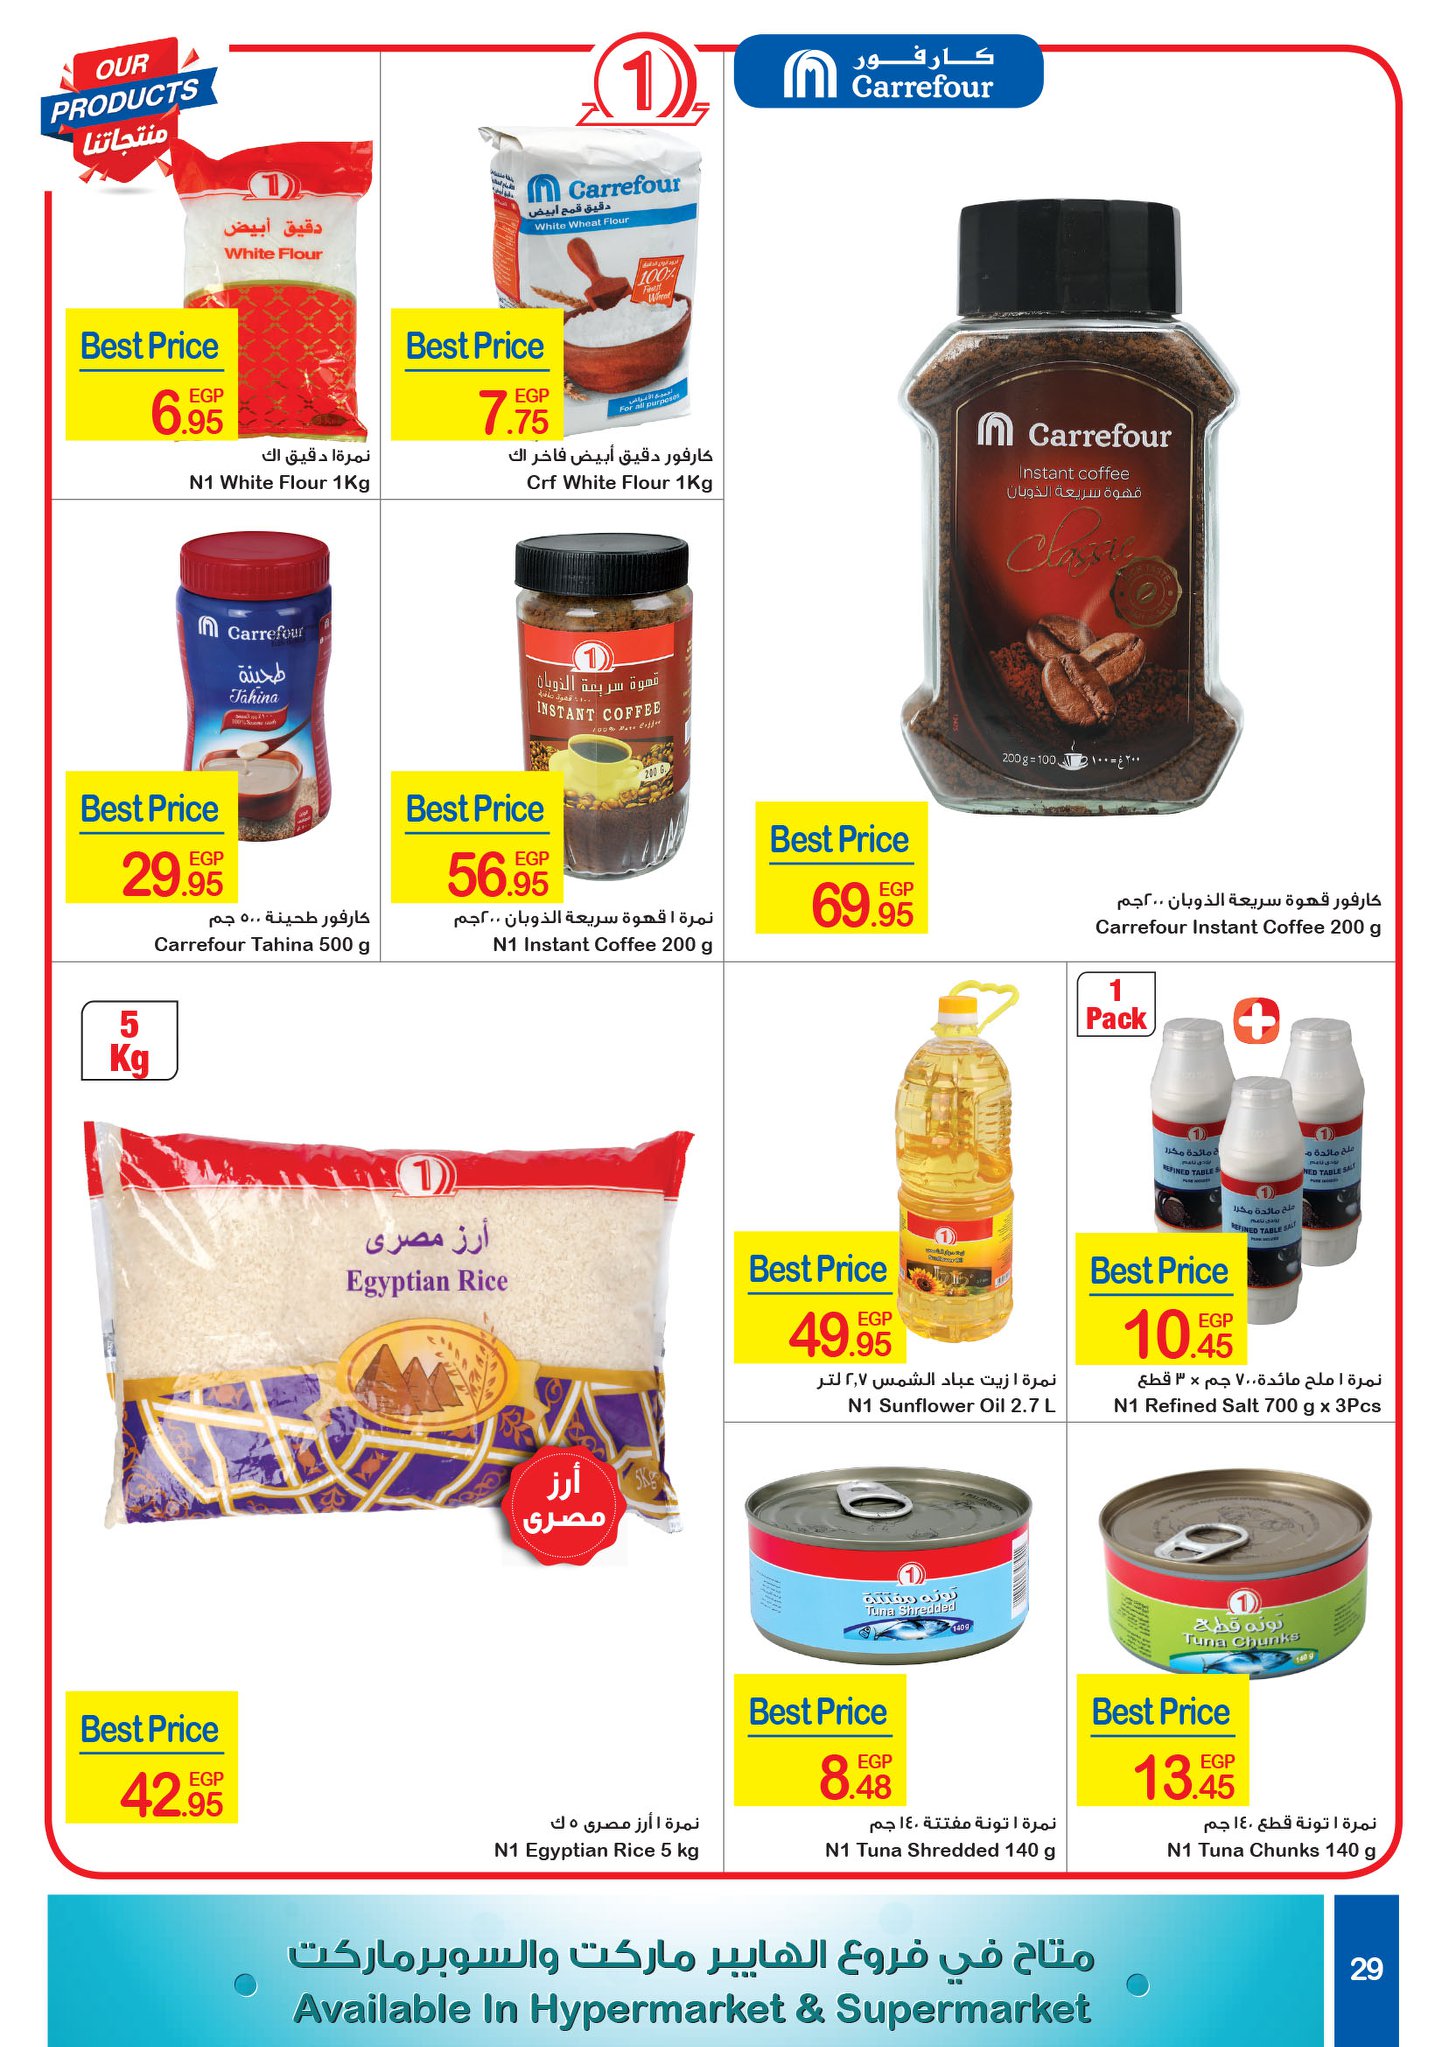 Carrefour Flyer from 16/7 till 27/7 | Carrefour Egypt 29